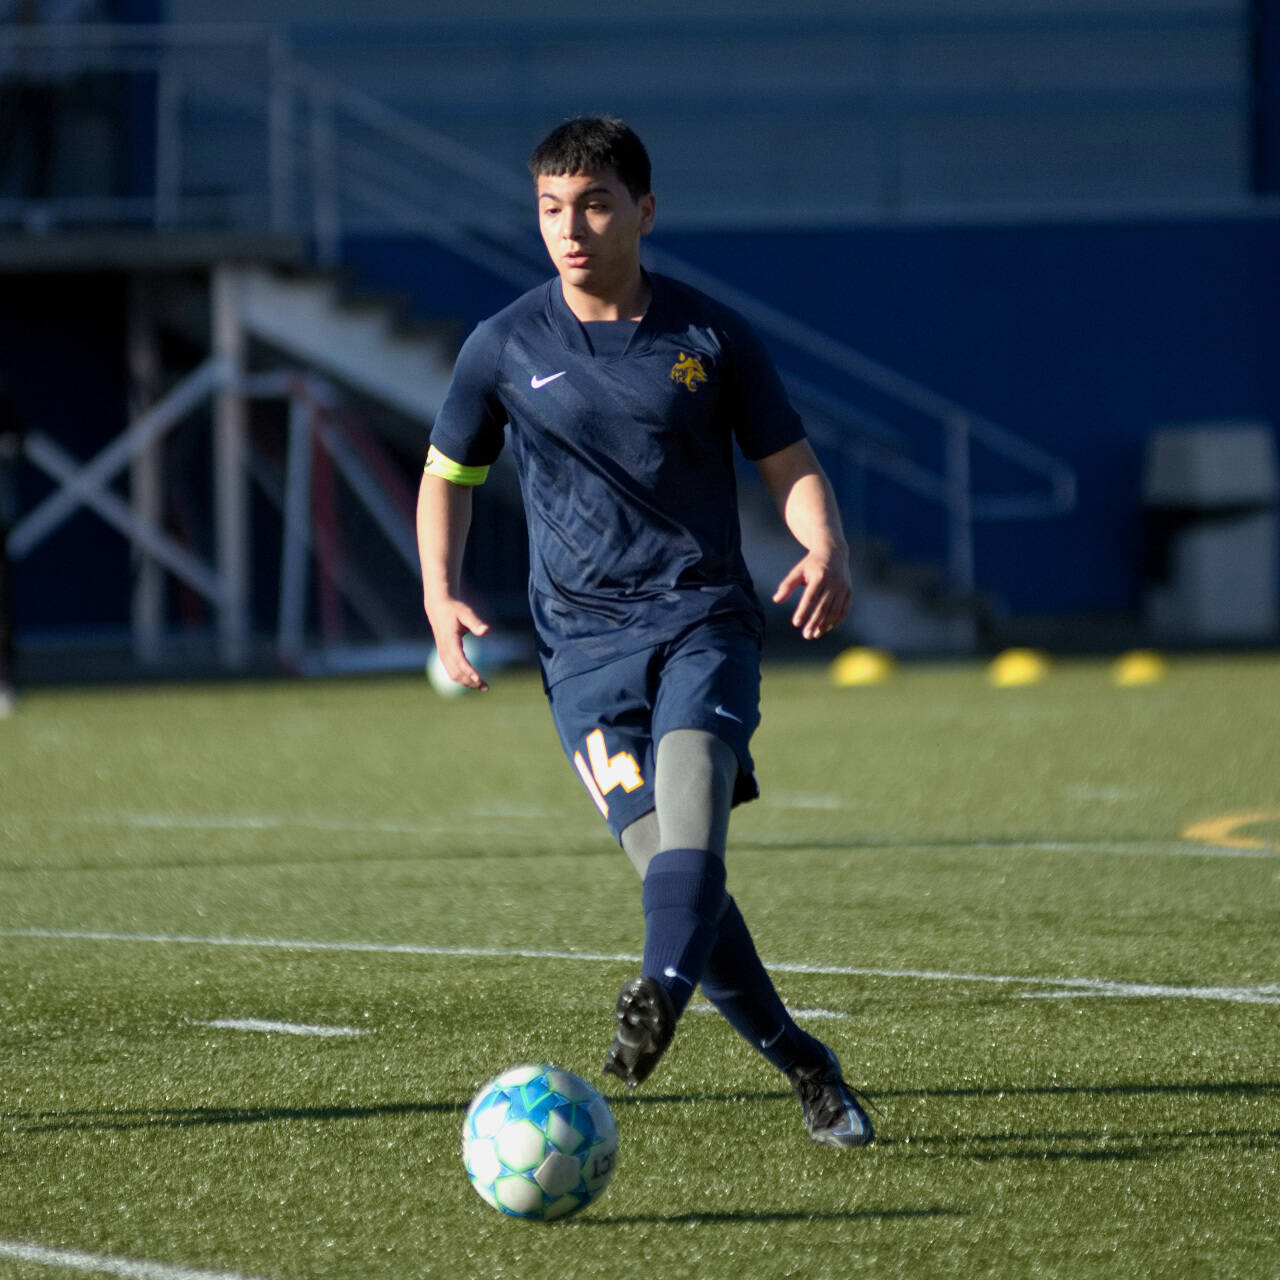 DAILY WORLD FILE PHOTO
Aberdeen senior forward Miguel Martinez was named to the 2A Evergreen Conference All-League First Team after leading the Bobcats in goals this season.